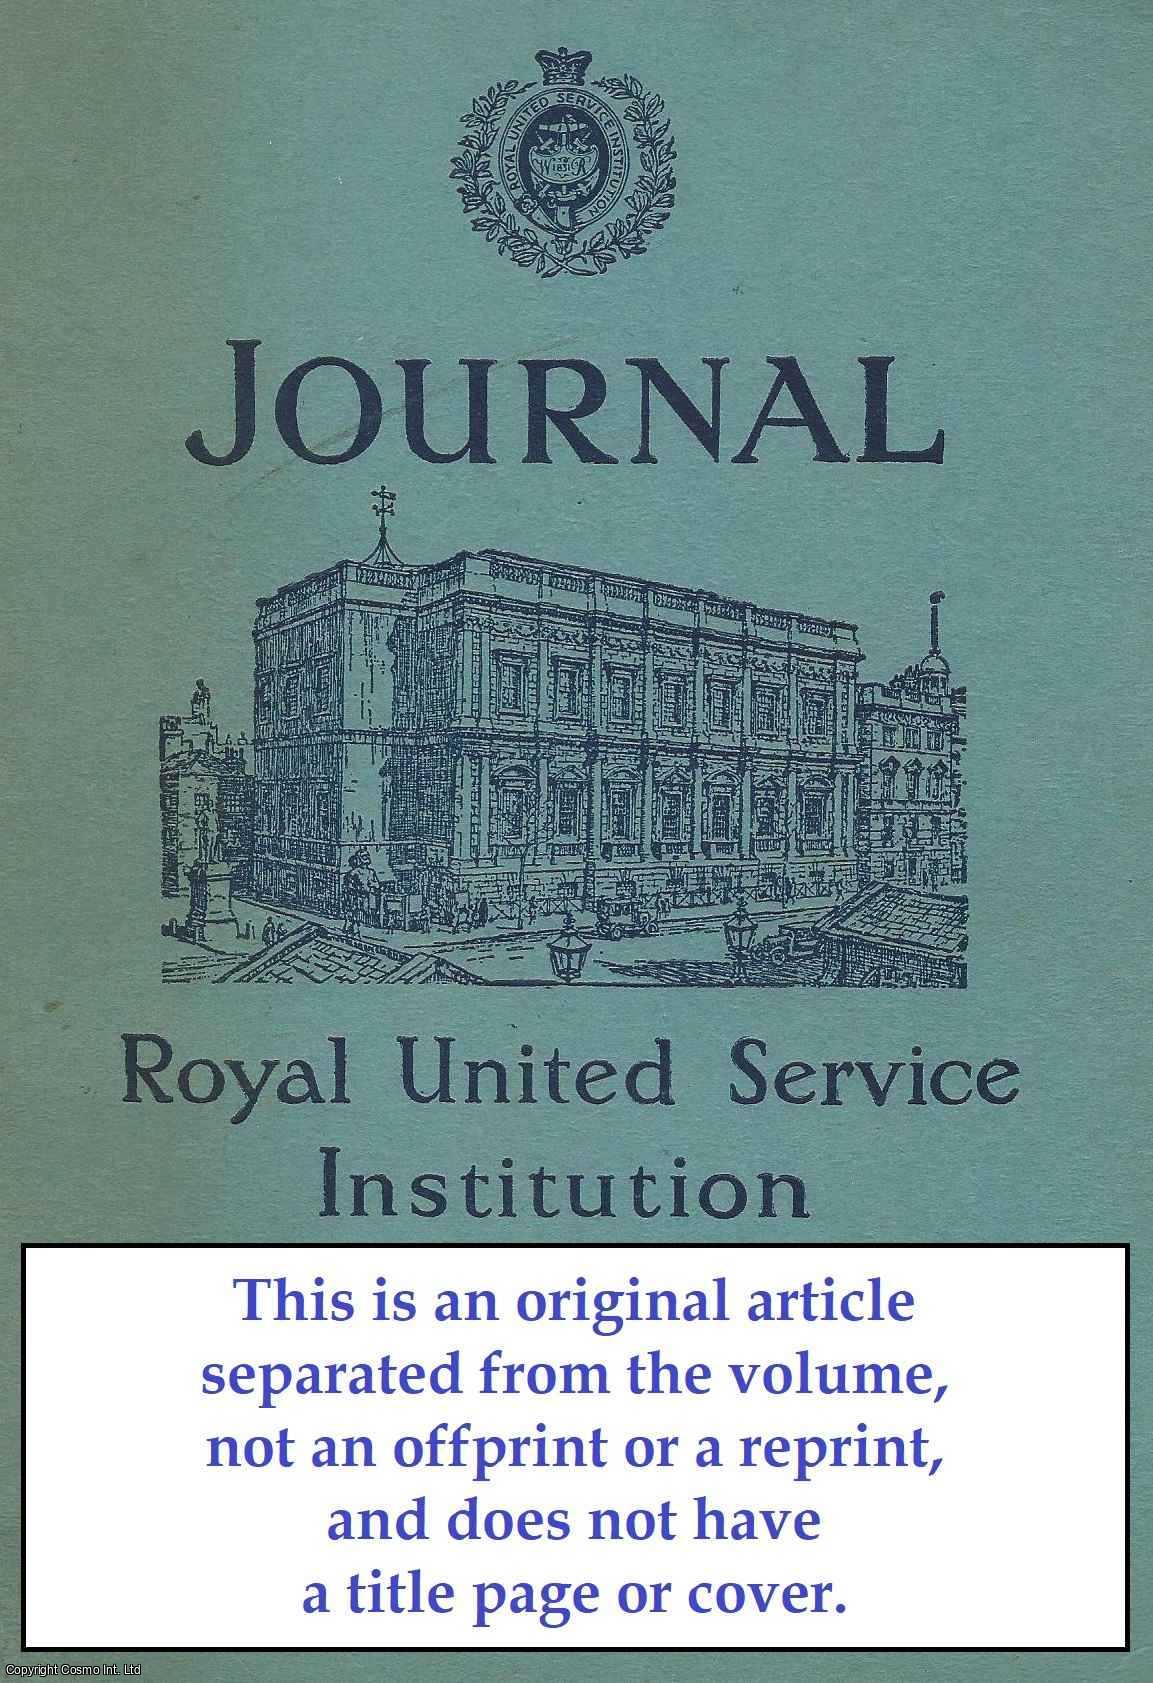 G. V. - Unconditional Surrender in The English Channel. An original article from Journal of The Royal United Service Institution, 1955.